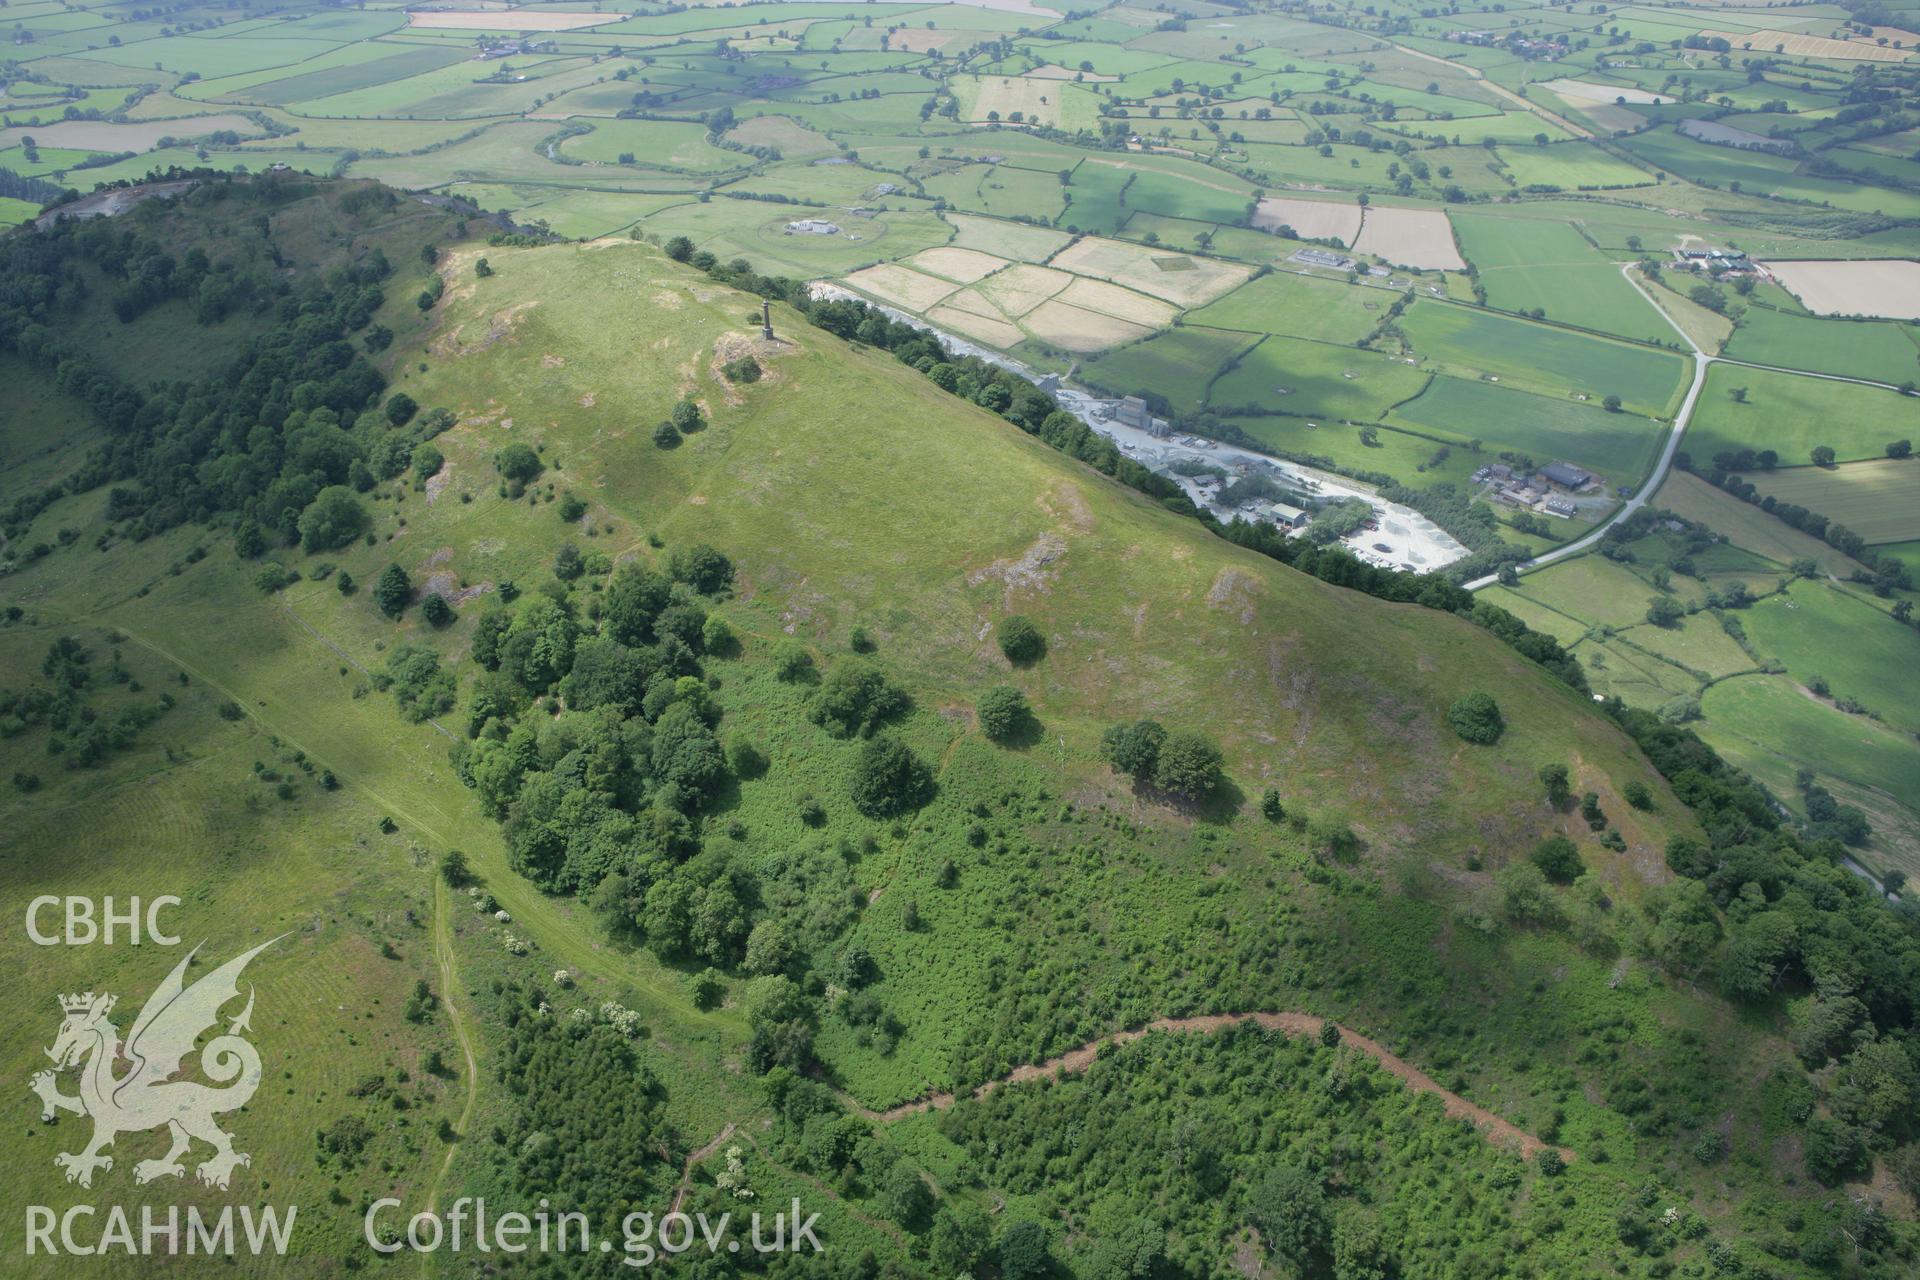 RCAHMW colour oblique photograph of Breddin Hillfort, with Rodney's pillar. Taken by Toby Driver on 01/07/2008.